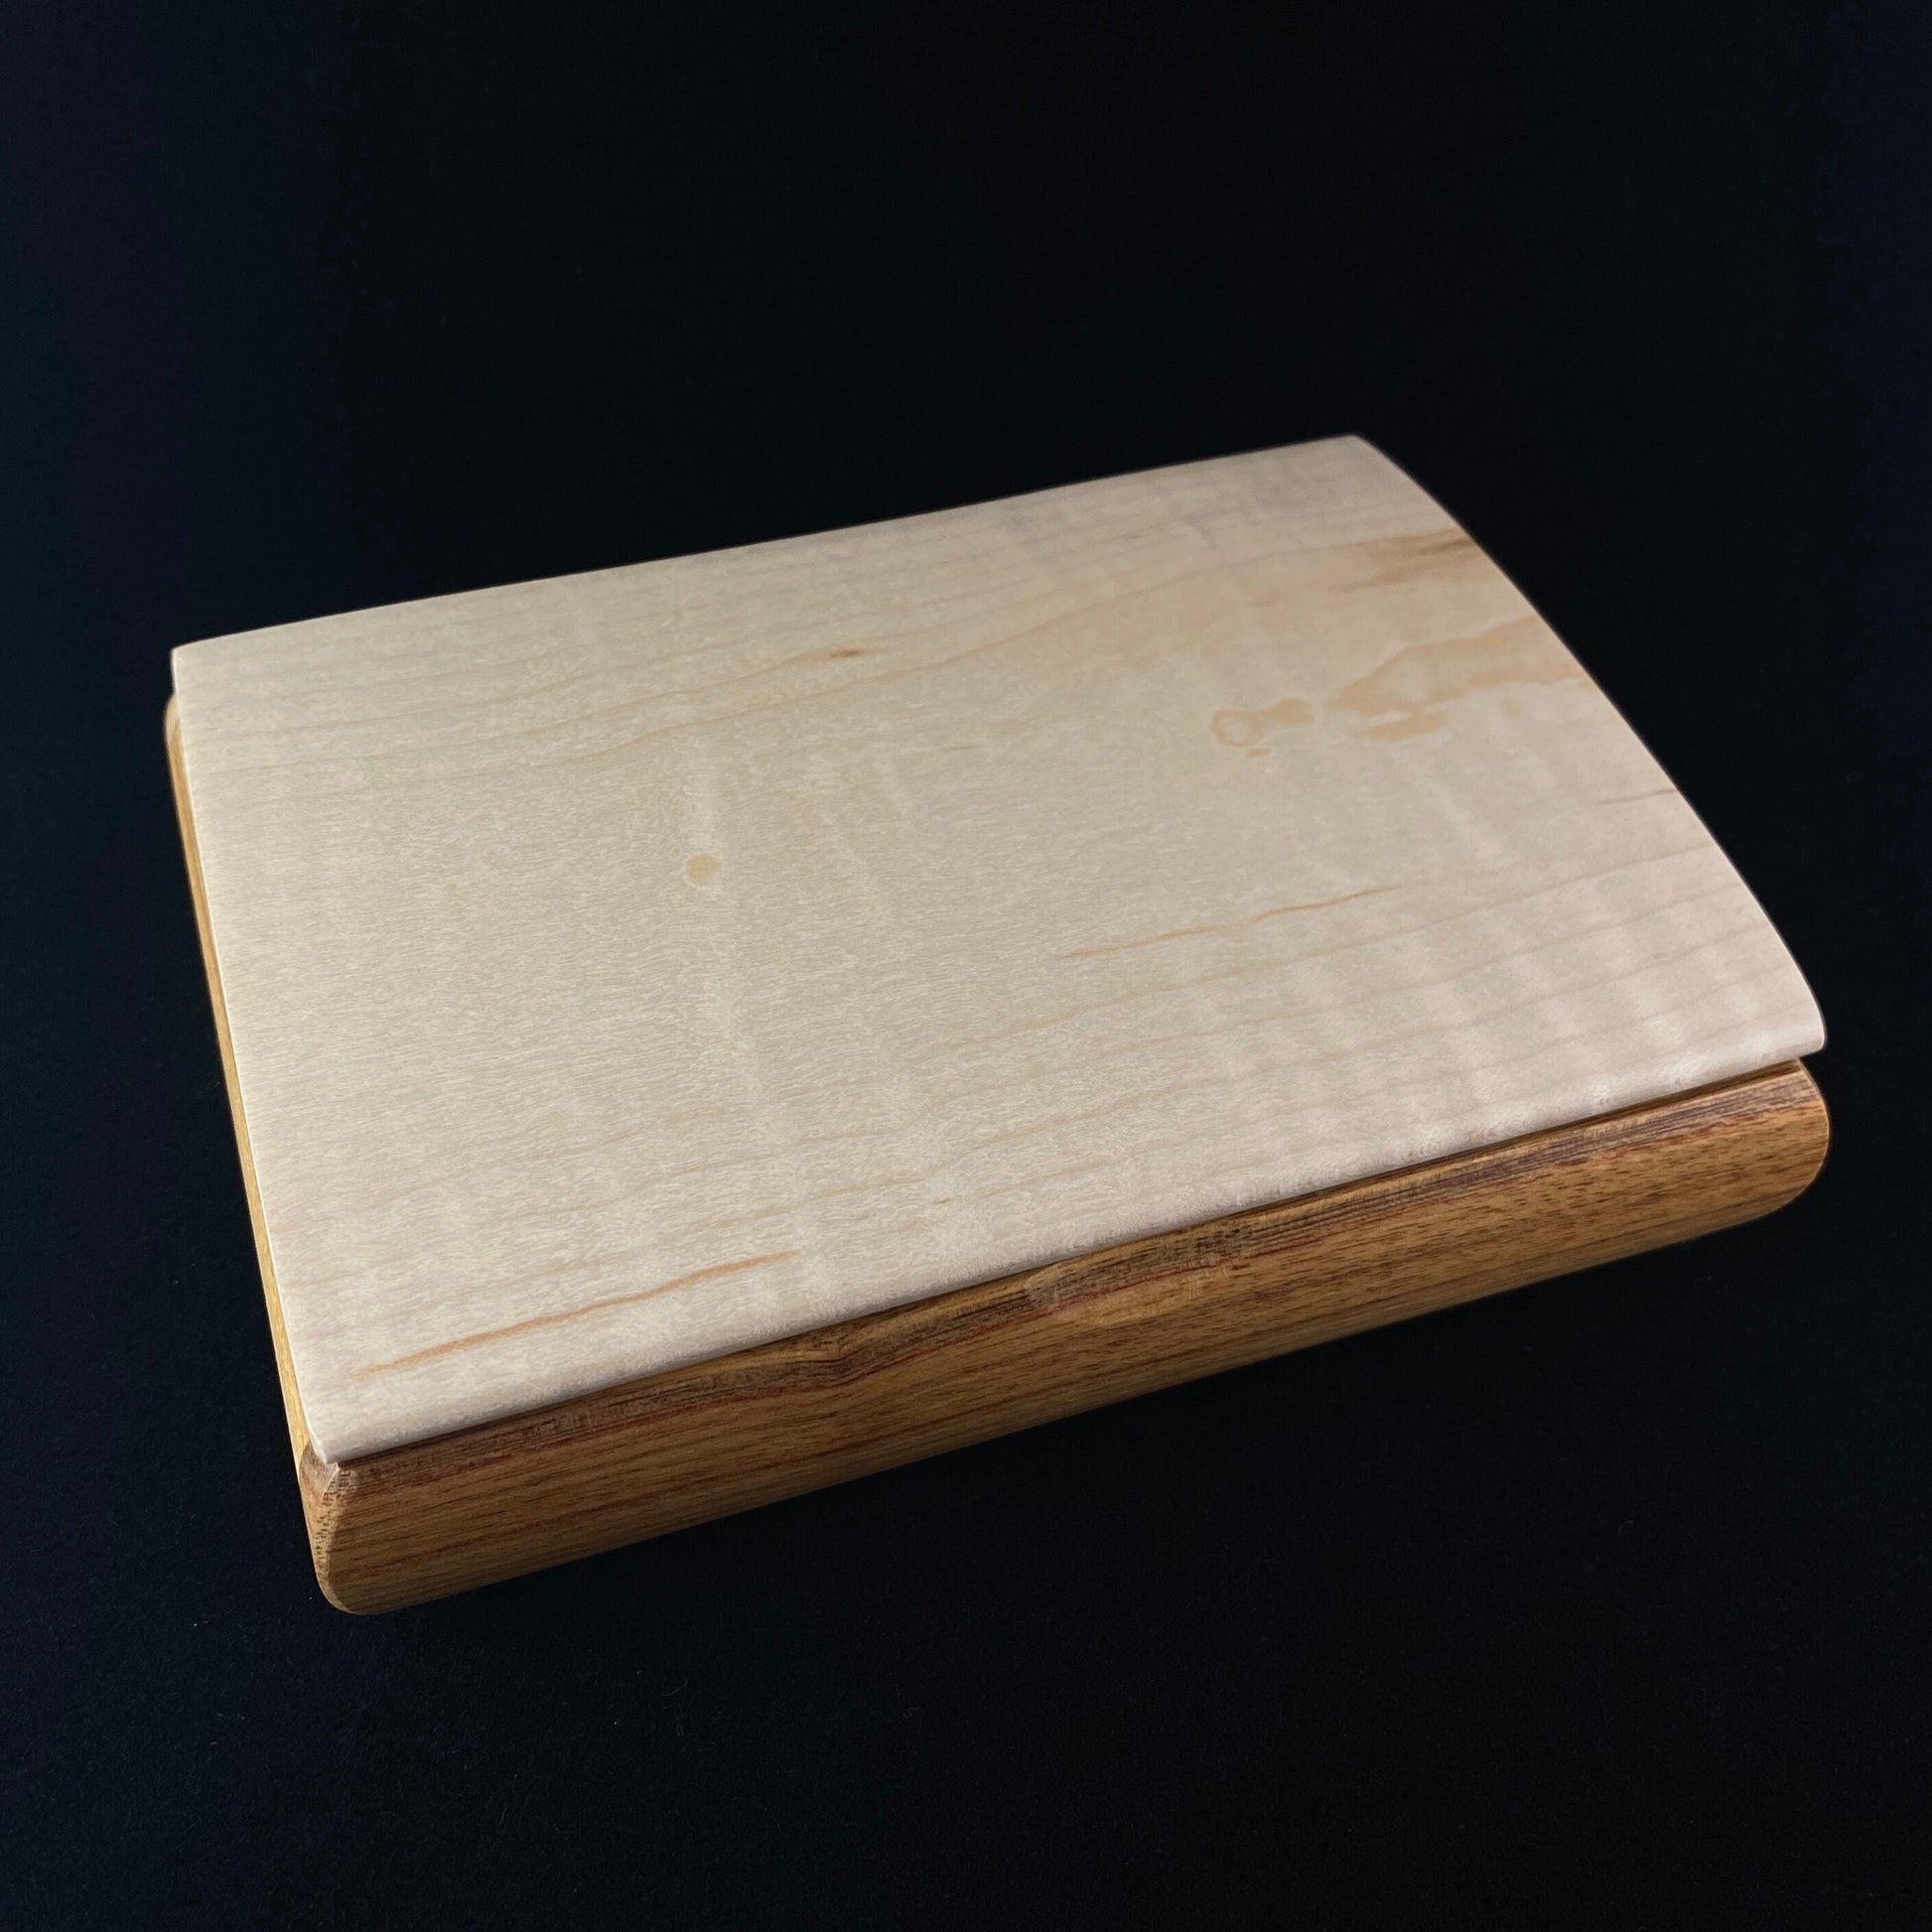 Handmade Wooden Jewelry Box - Canarywood and Curly Maple